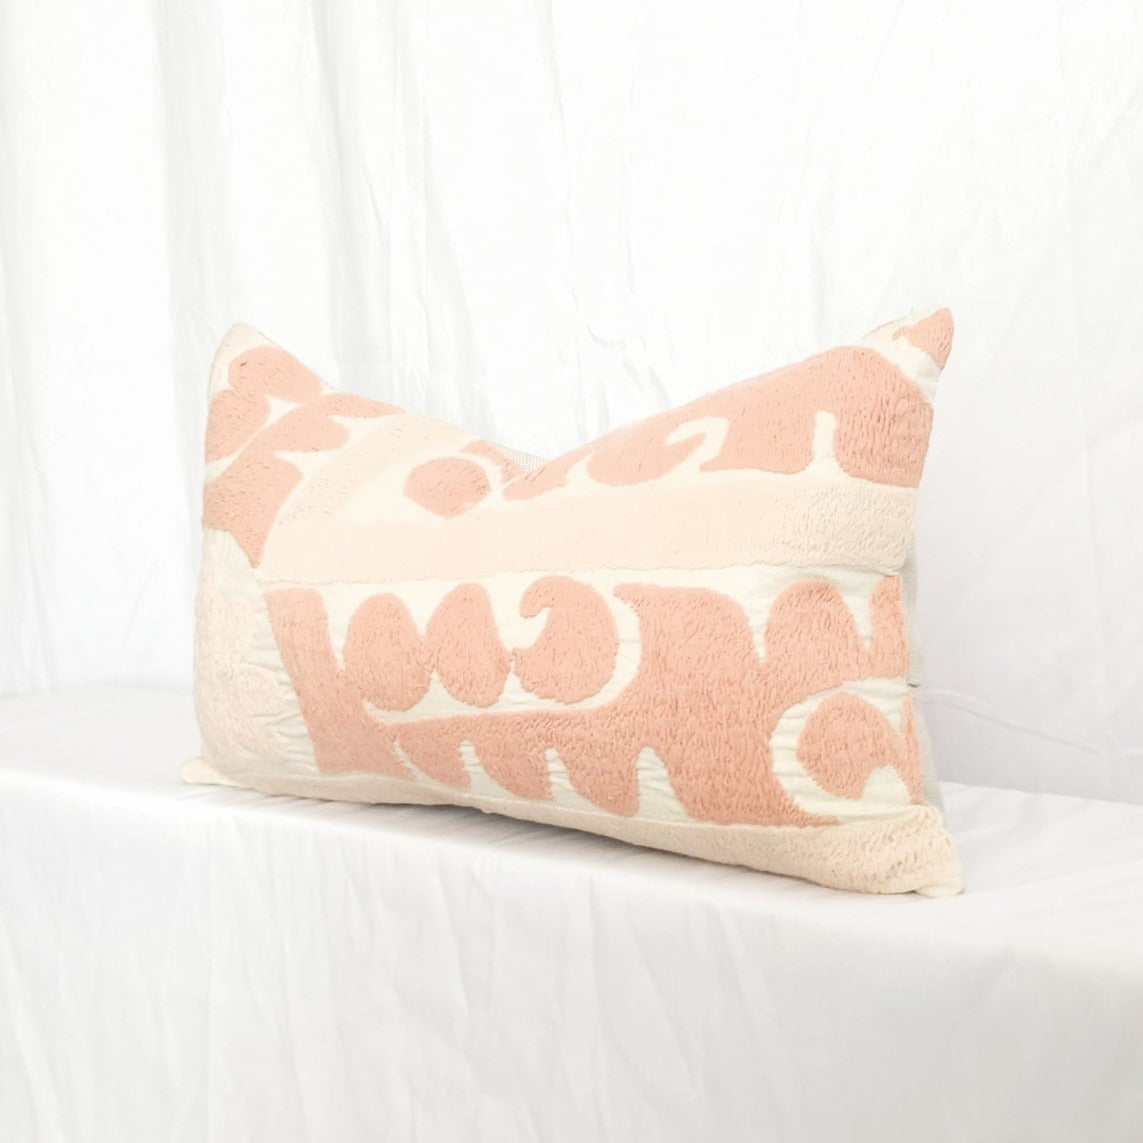 Azra Pink Boho Pillow Cover, Embroidered Throw Pillow, Suzani Pillow | Dusk & Bloom